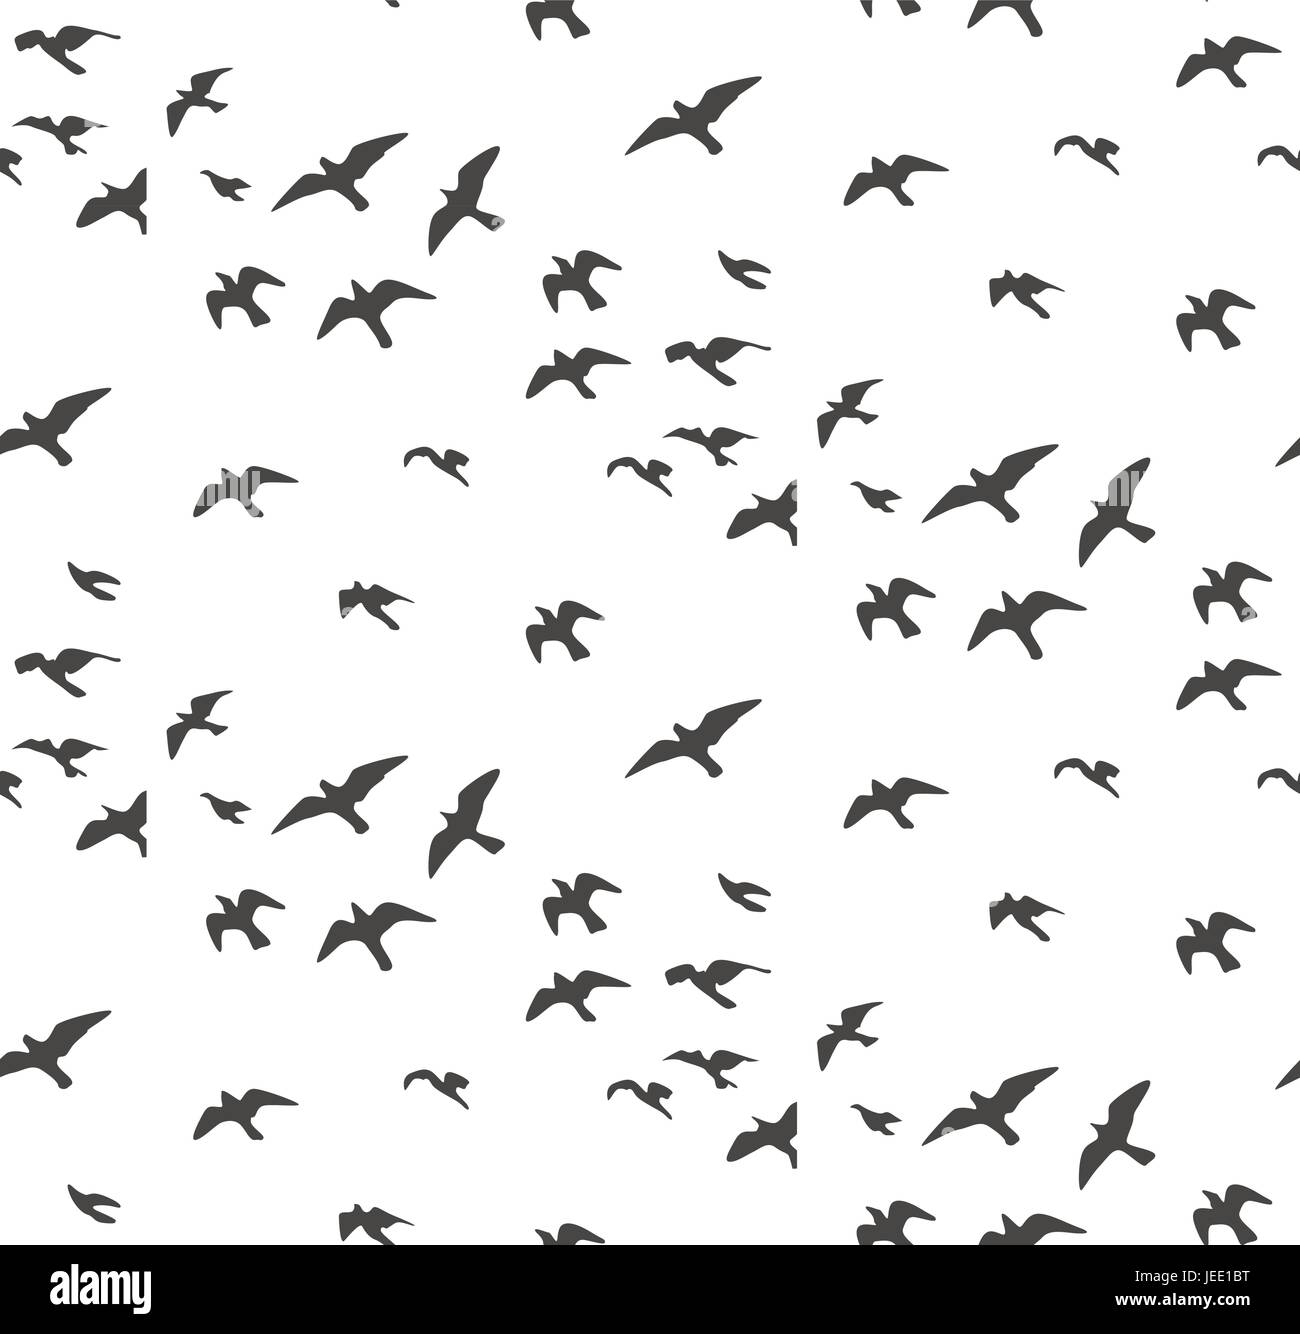 Seagulls silhouettes seamless pattern. Flock of flying birds gray silhouette. Dove, sea-gull sketch abstract bird Vector for wrapping paper cute desig Stock Vector